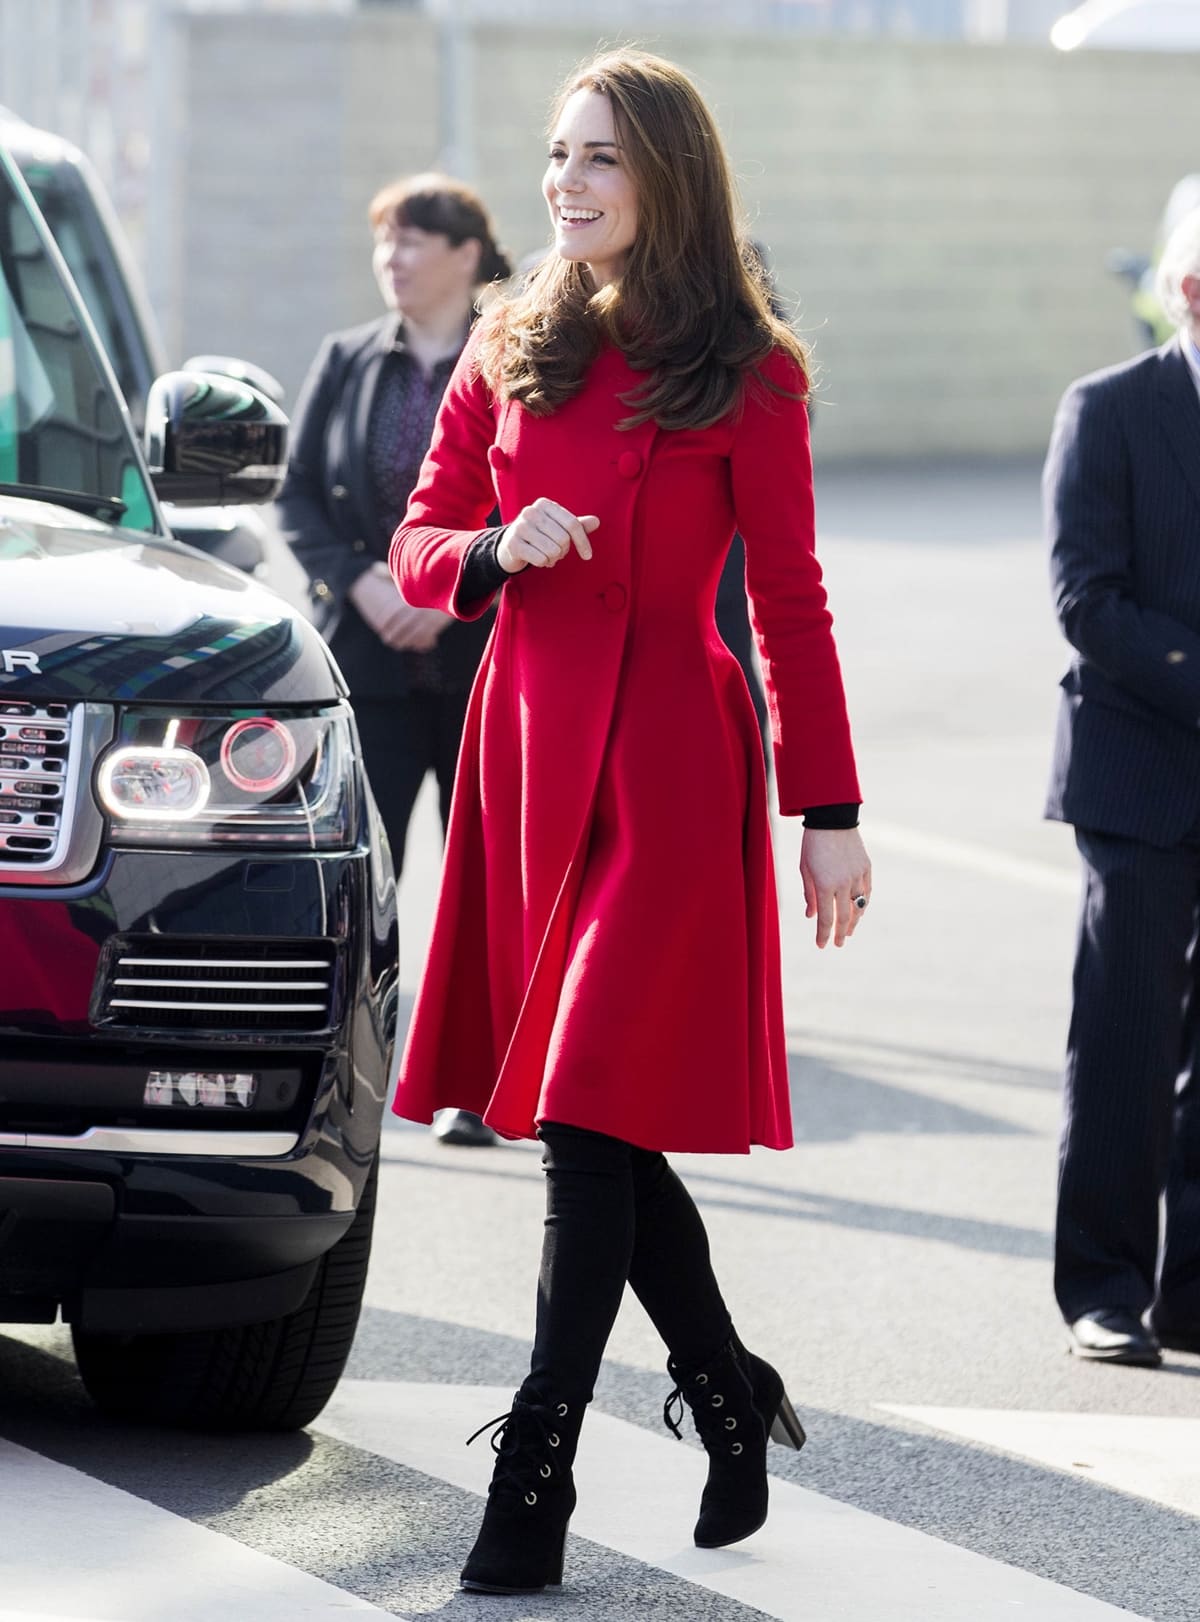 Kate Middleton arrived in Northern Ireland for a two-day trip, sporting a recycled red Carolina Herrera coat dress paired with black leggings and L.K. Bennett ankle booties, as she visited Windsor Park Stadium, home of the Irish Football Association, on February 27, 2019, in Belfast, Northern Ireland